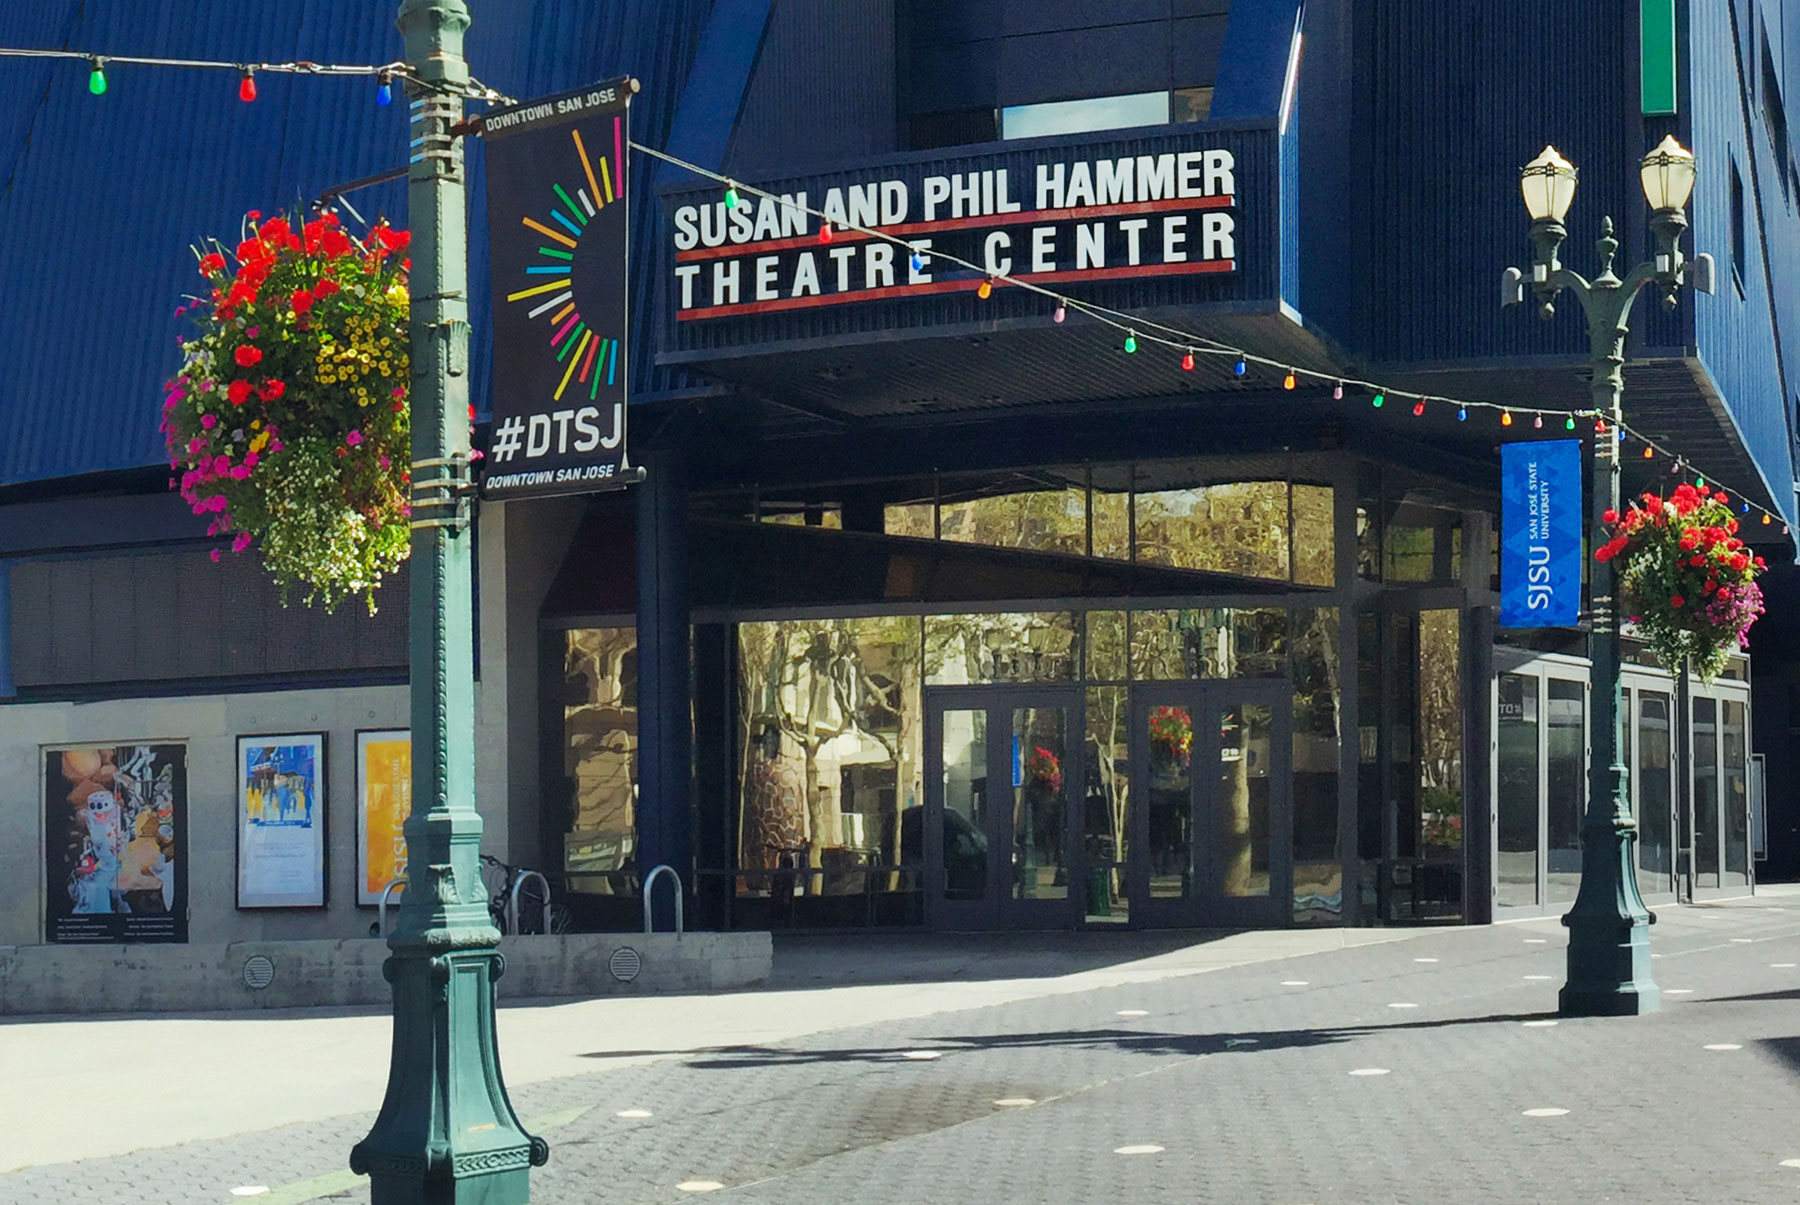 Hammer Theatre Center located in hte heart of downtown San Jose.